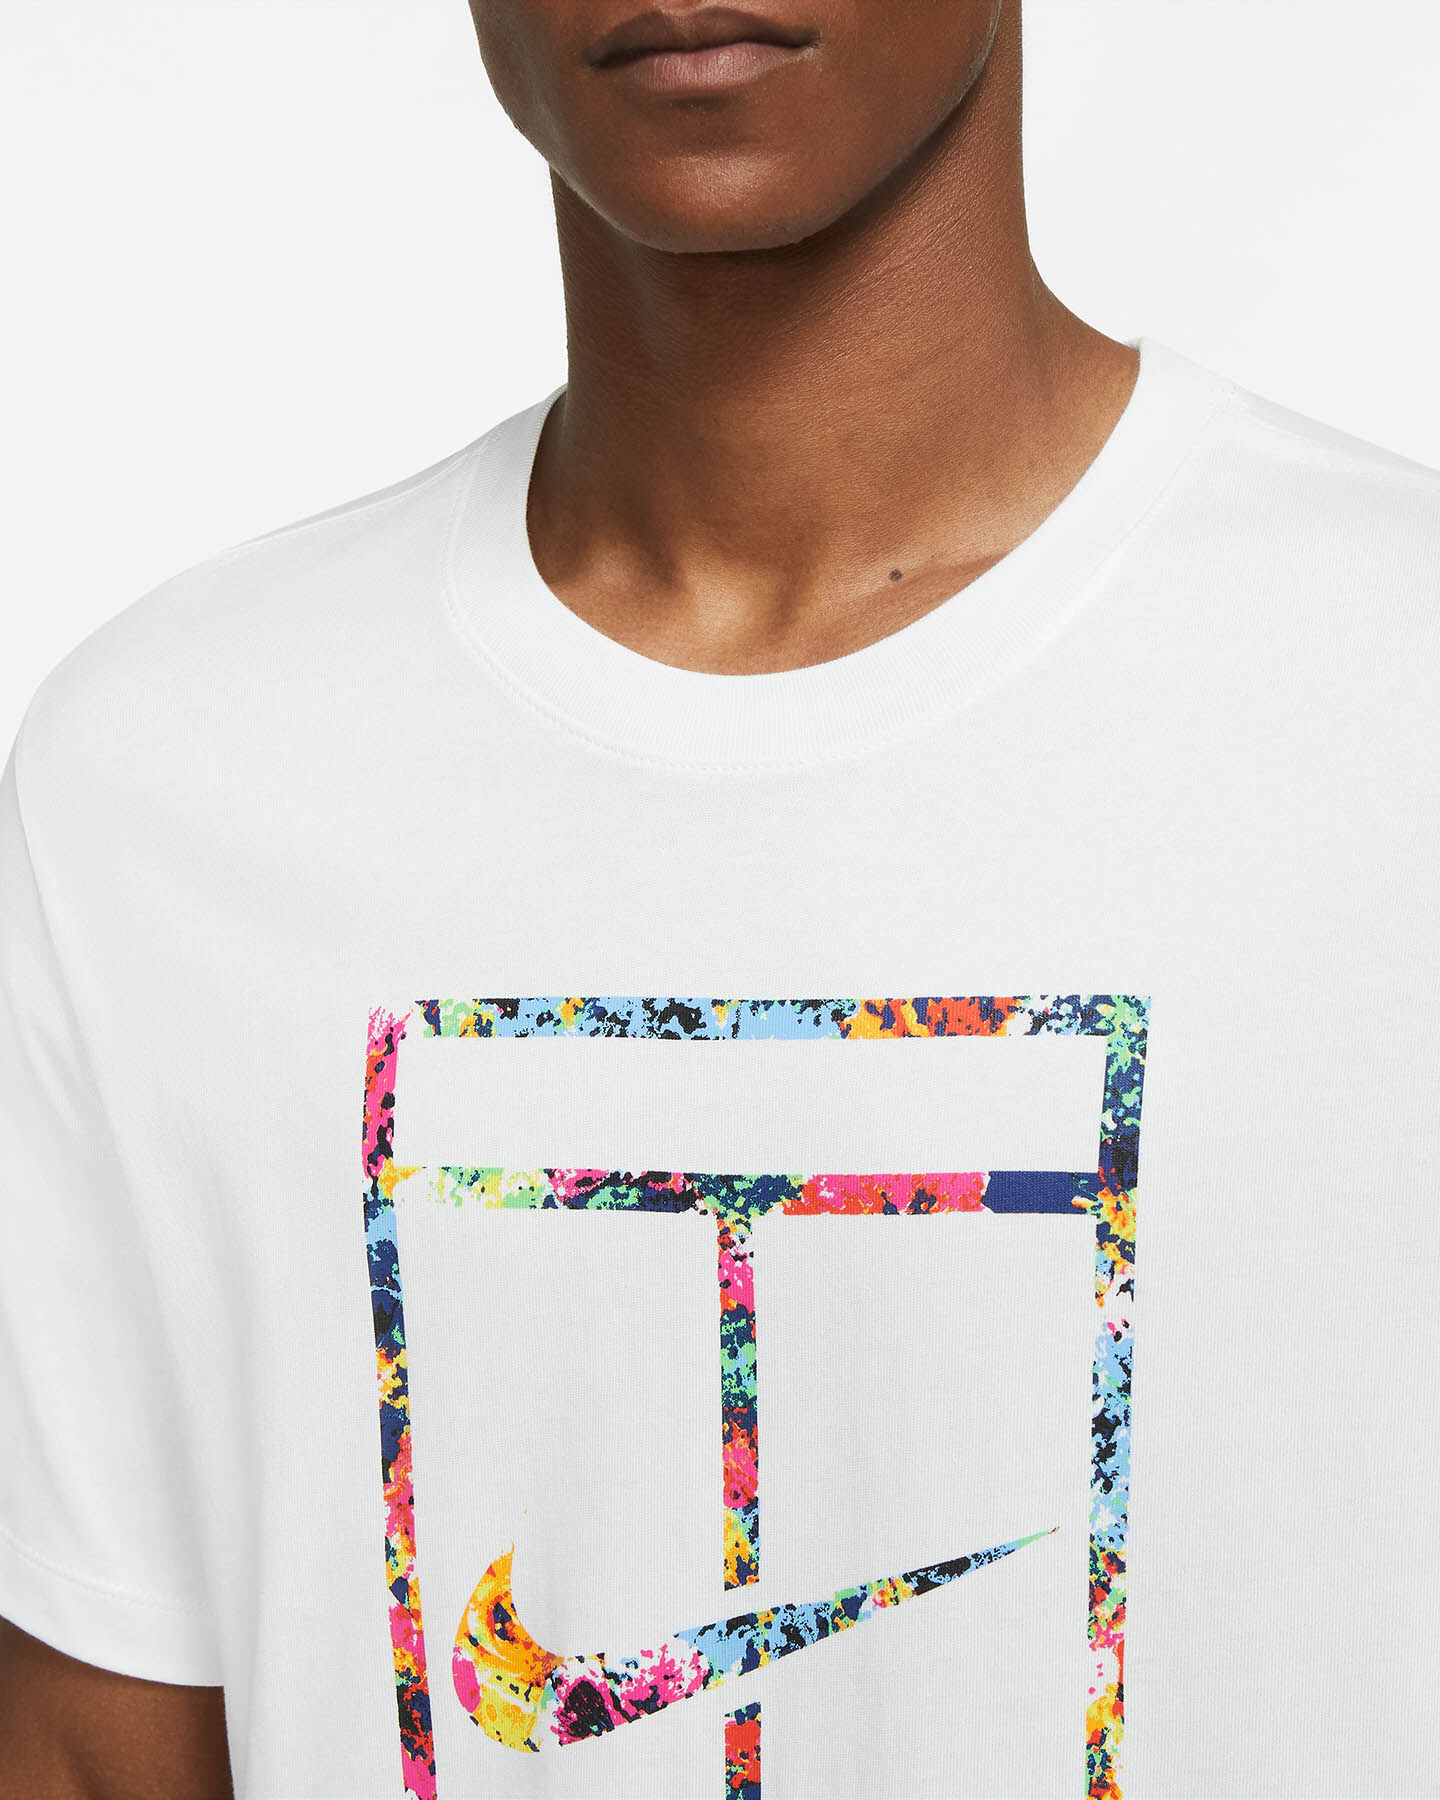  T-Shirt tennis NIKE COURT GARDEN PARTY M S5436112|100|S scatto 2